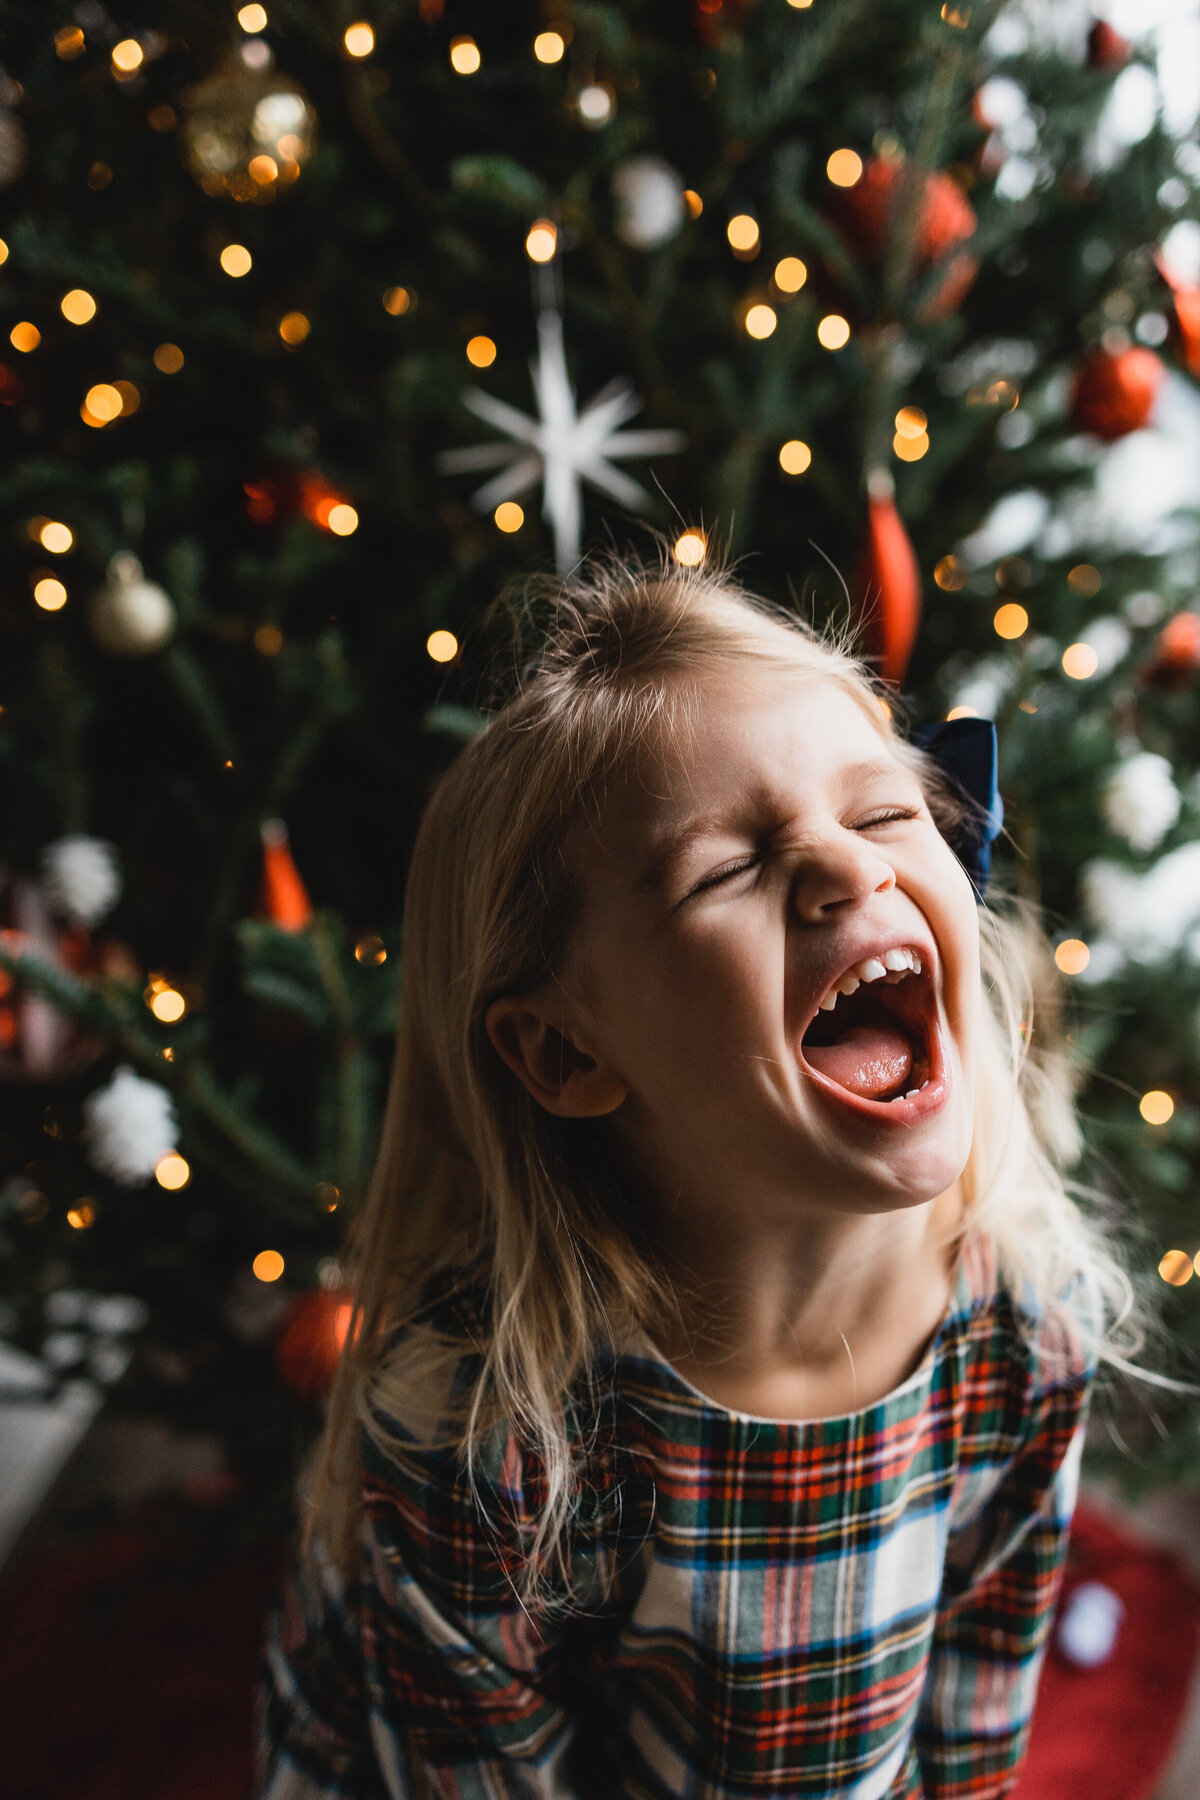 Little girl joyfully laughing in front of a Christmas tree